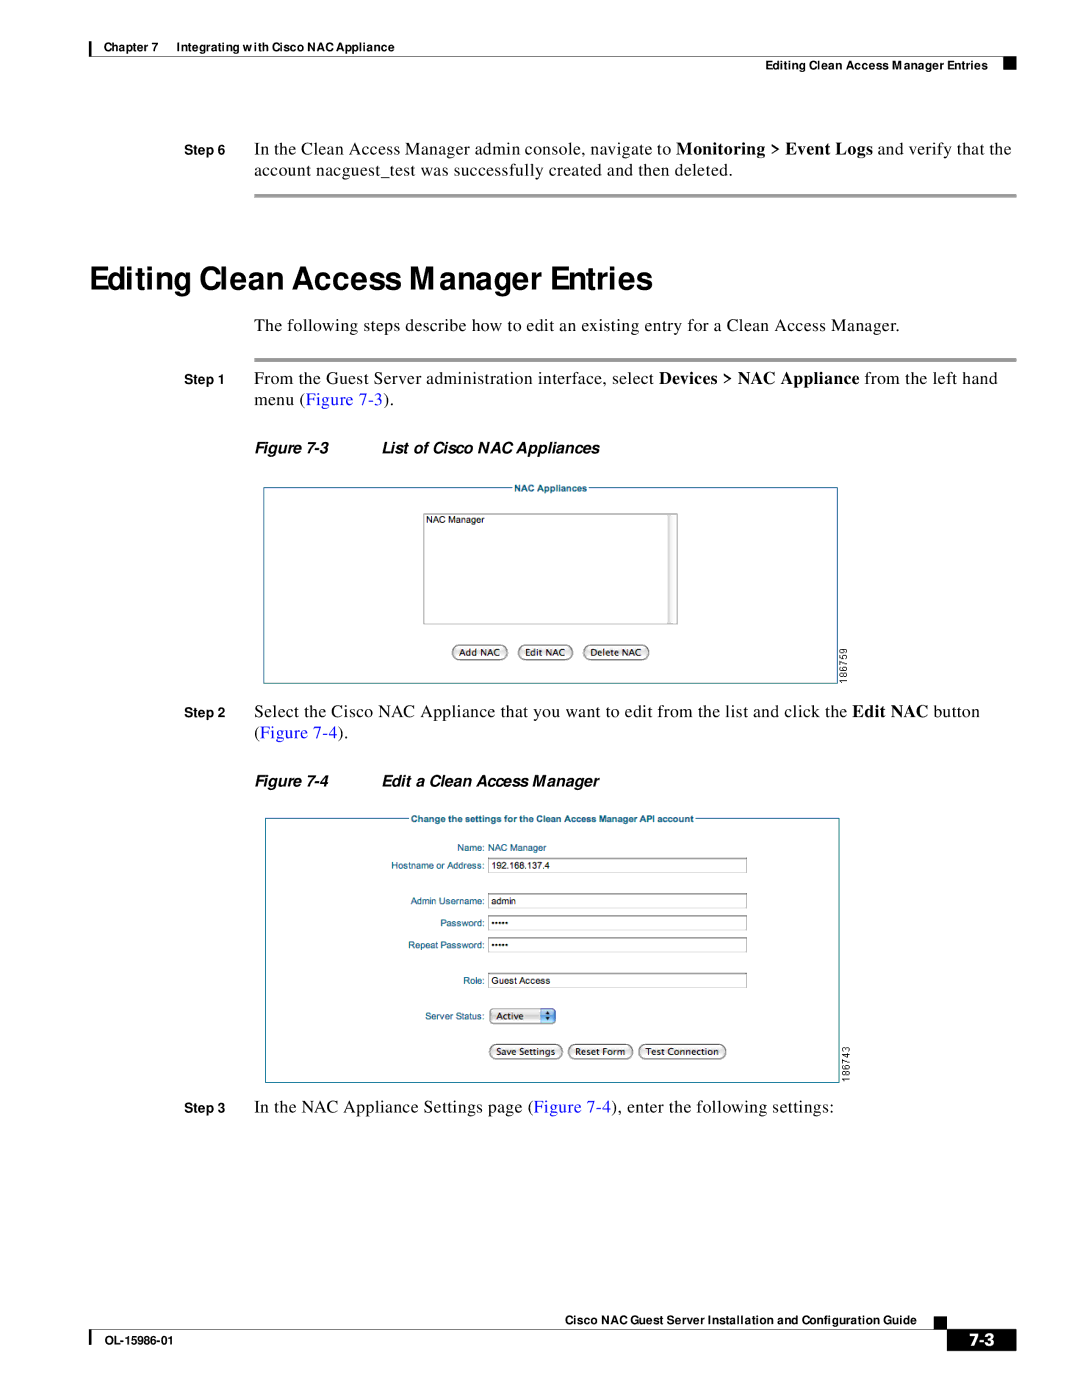 Cisco Systems OL-15986-01 manual Editing Clean Access Manager Entries, List of Cisco NAC Appliances 